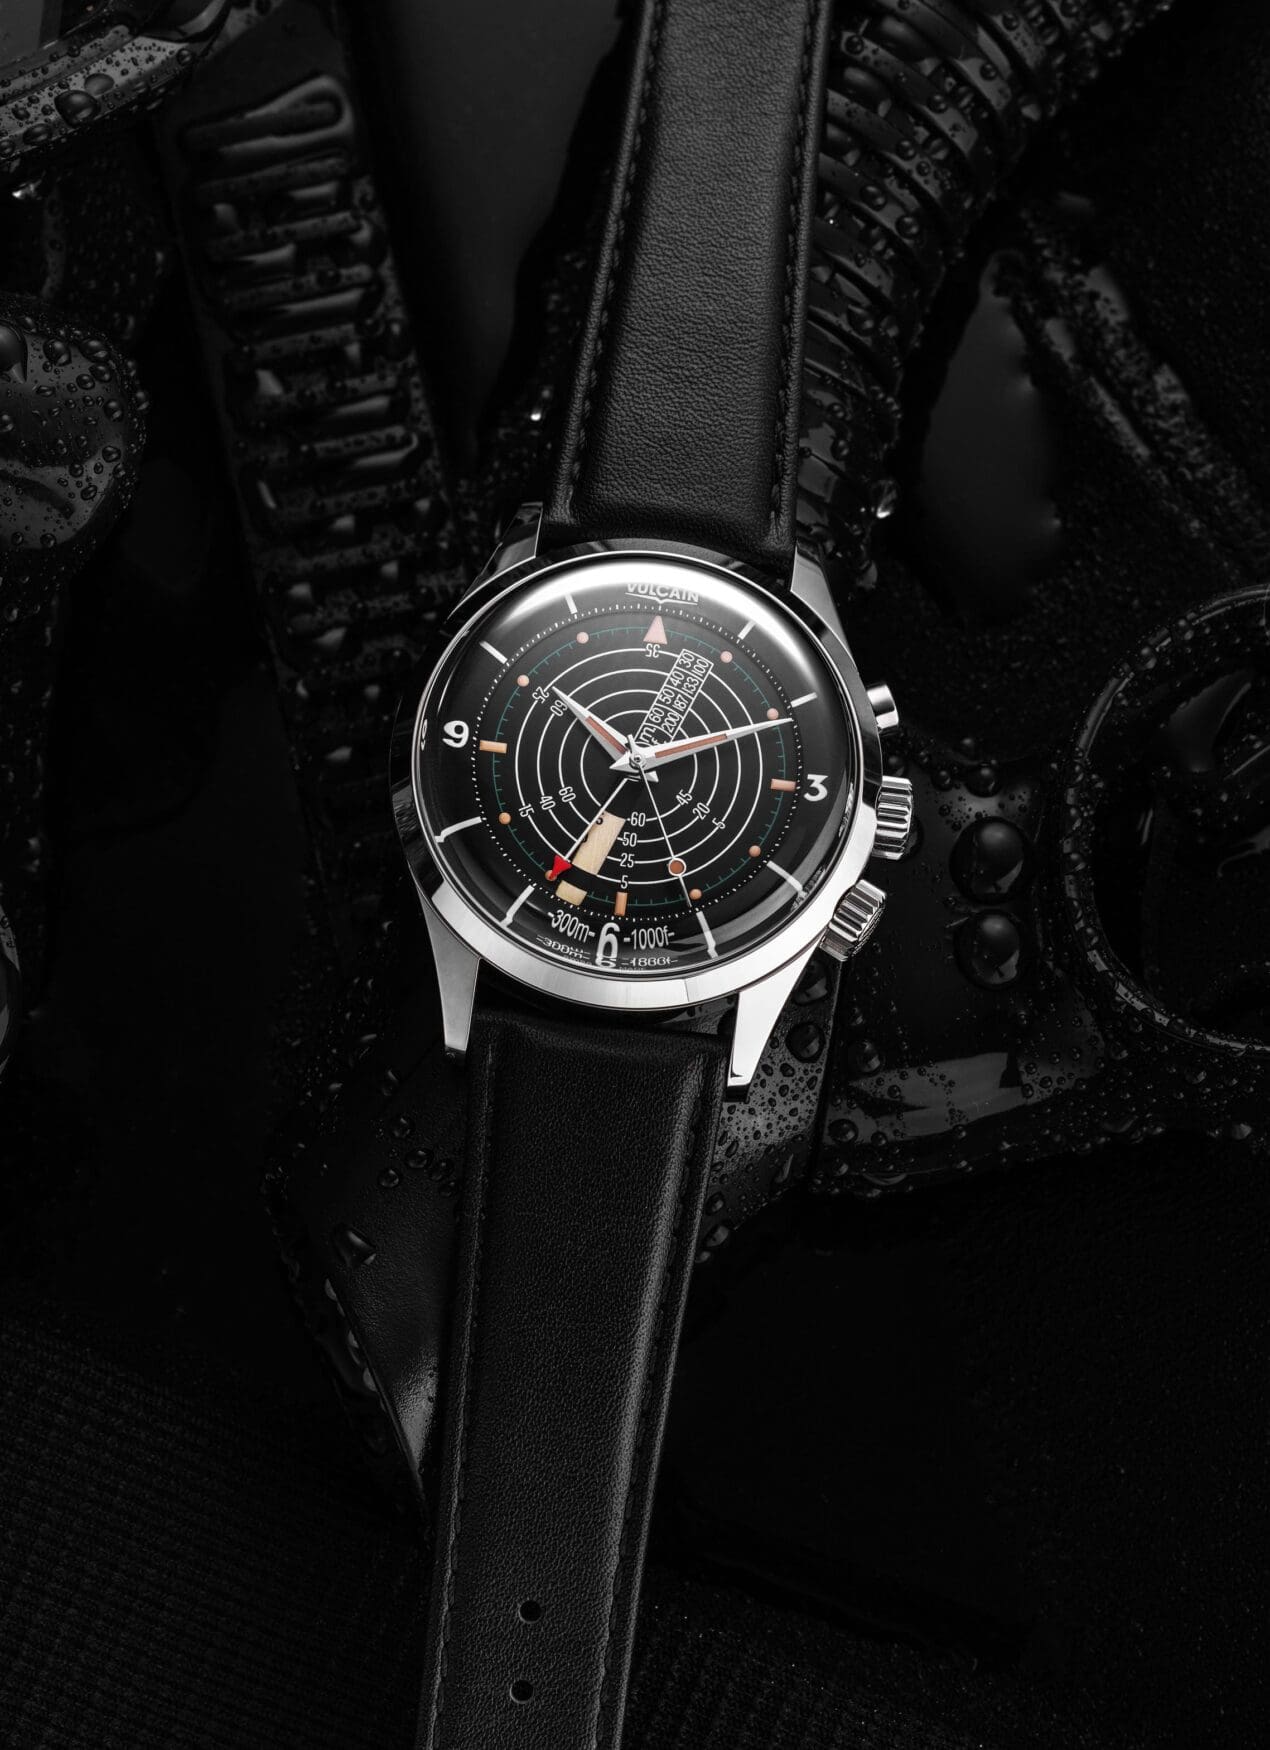 The Vulcain Cricket Nautical celebrates its 62nd birthday with a sapphire upgrade